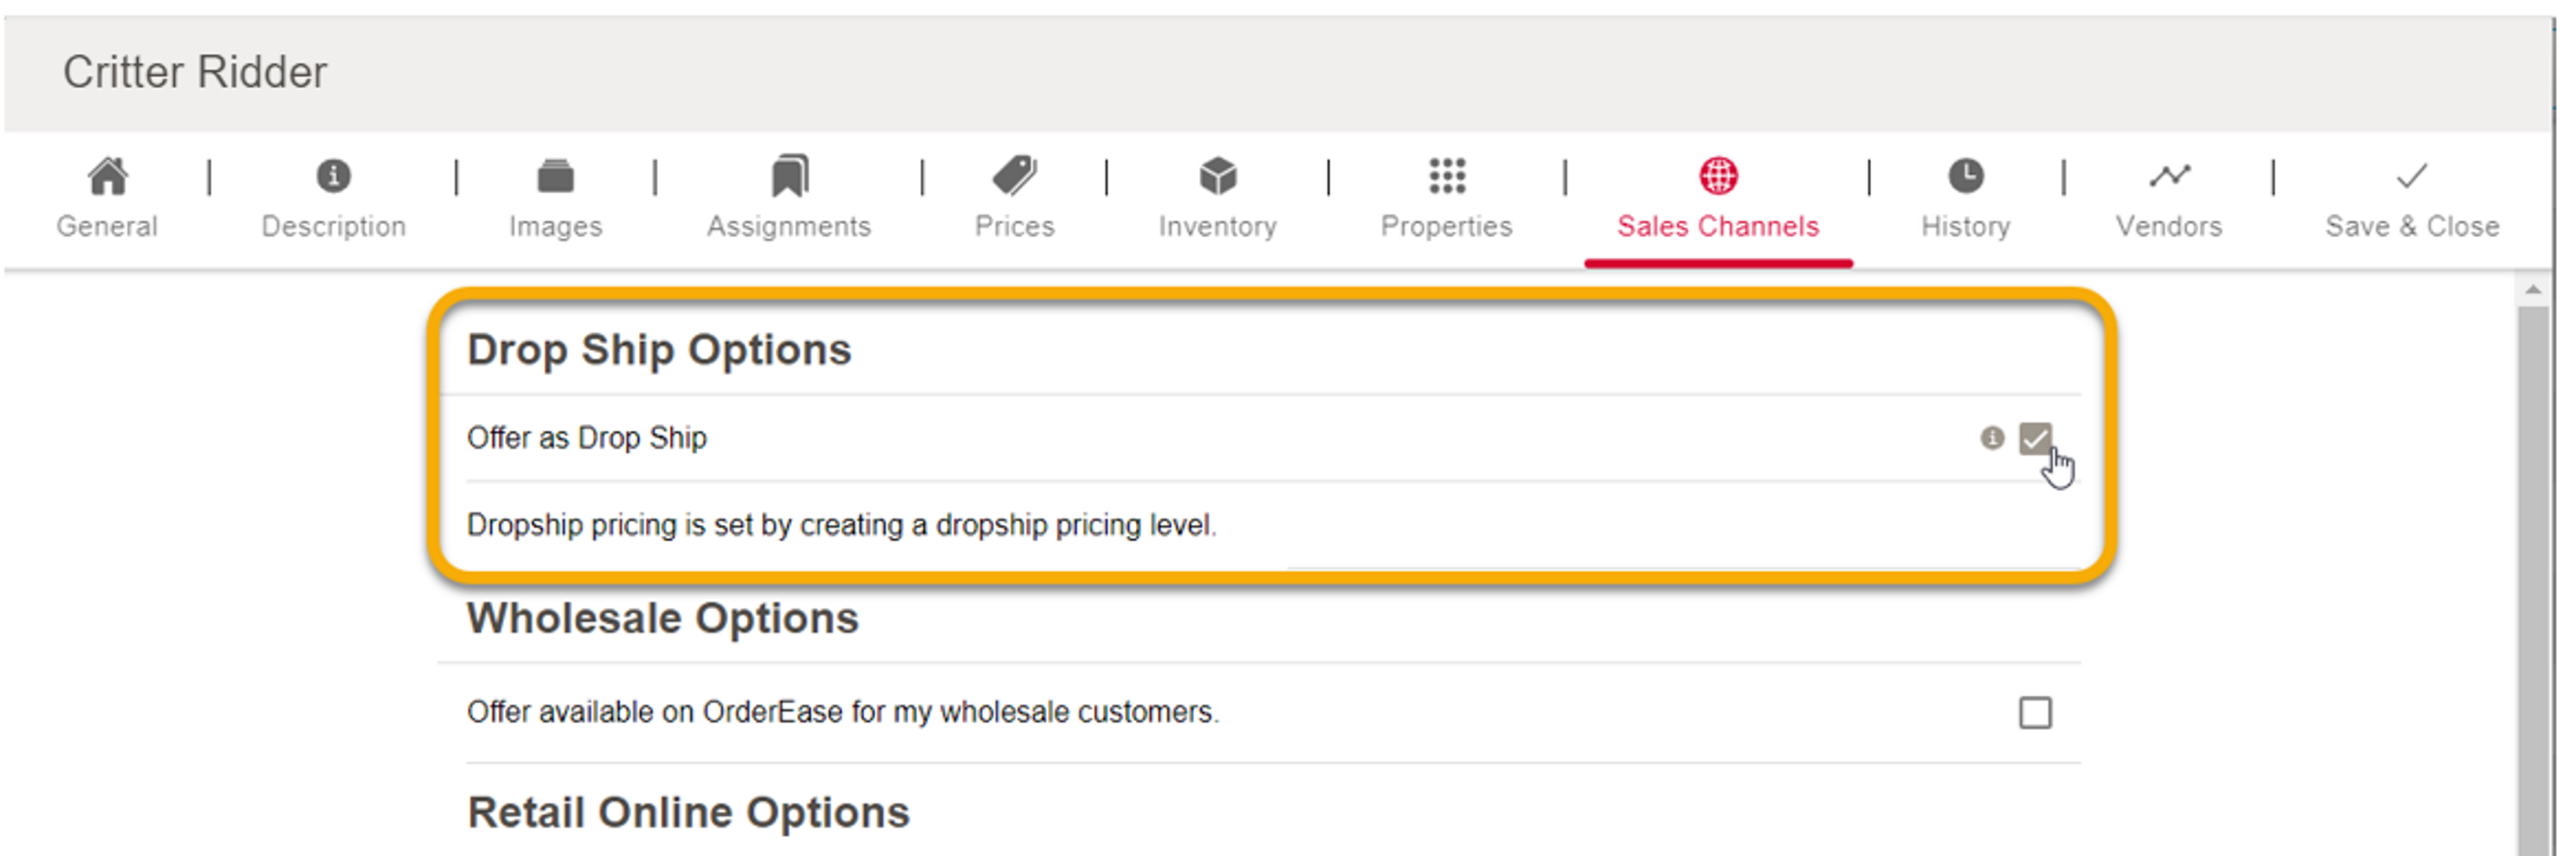 Setting a reminder for admin to create drop ship pricing level